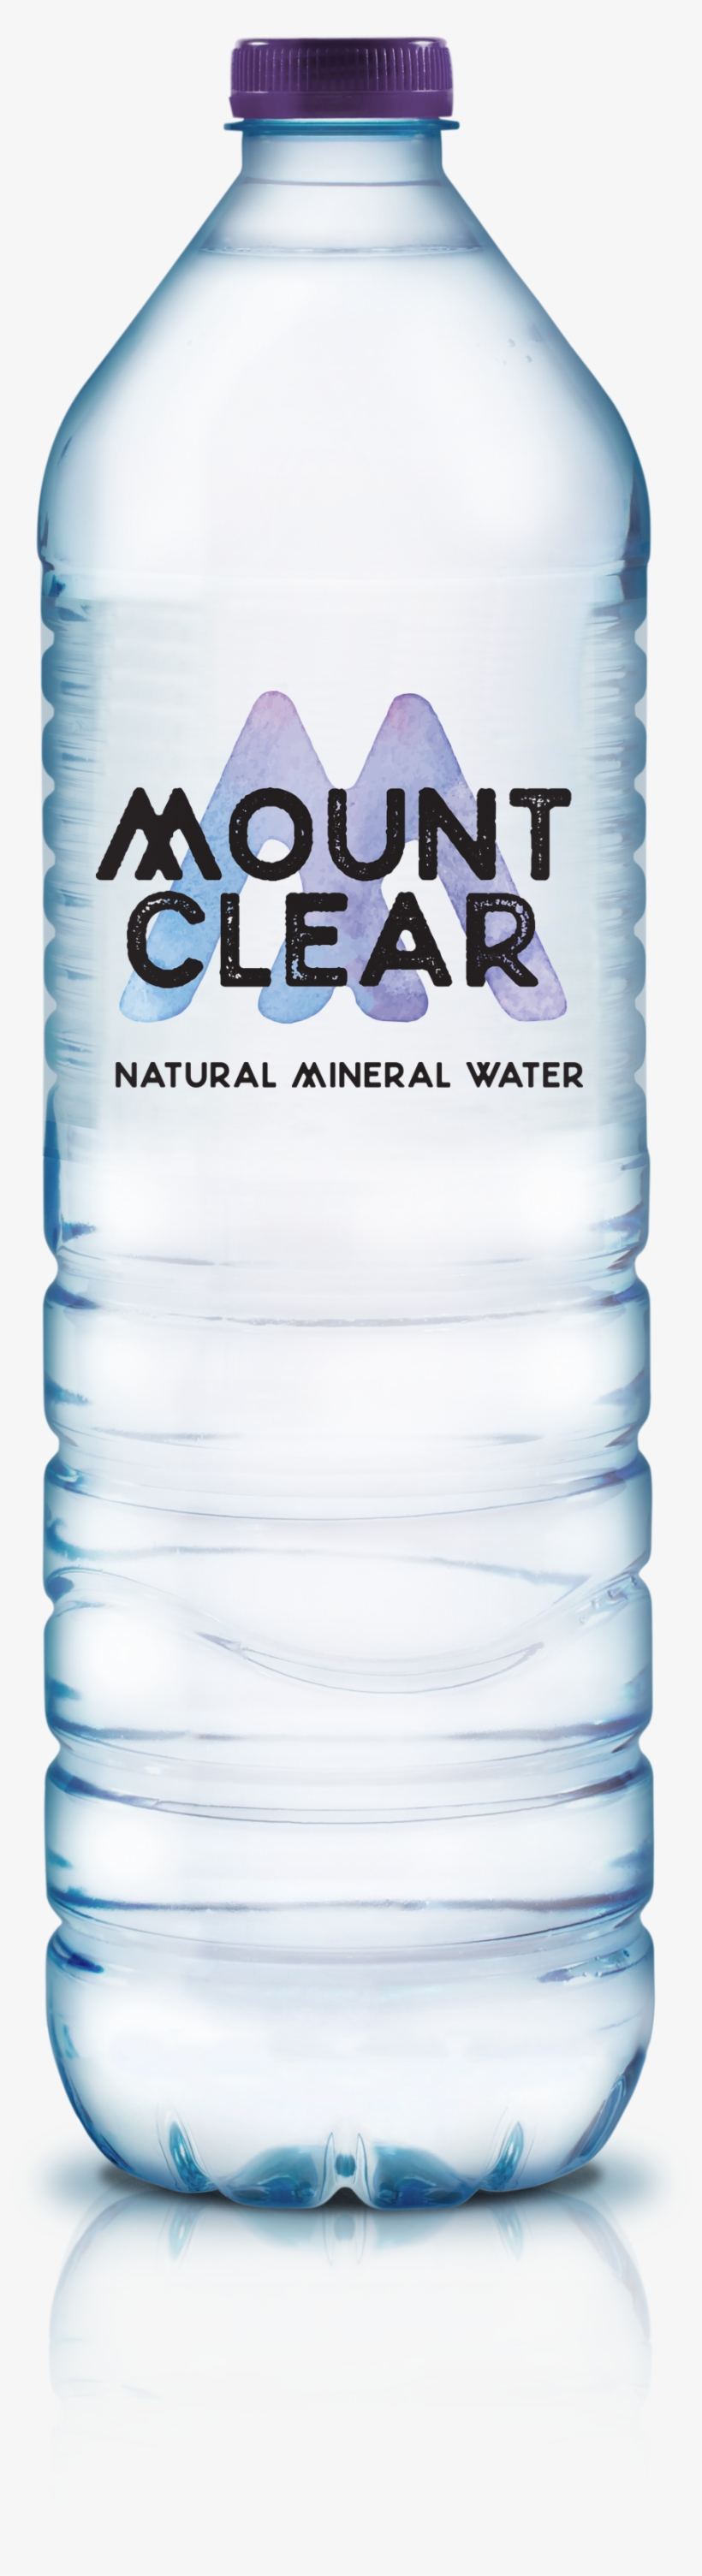 Mount Clear Water Free Download - Plastic Bottle, transparent png #2568541